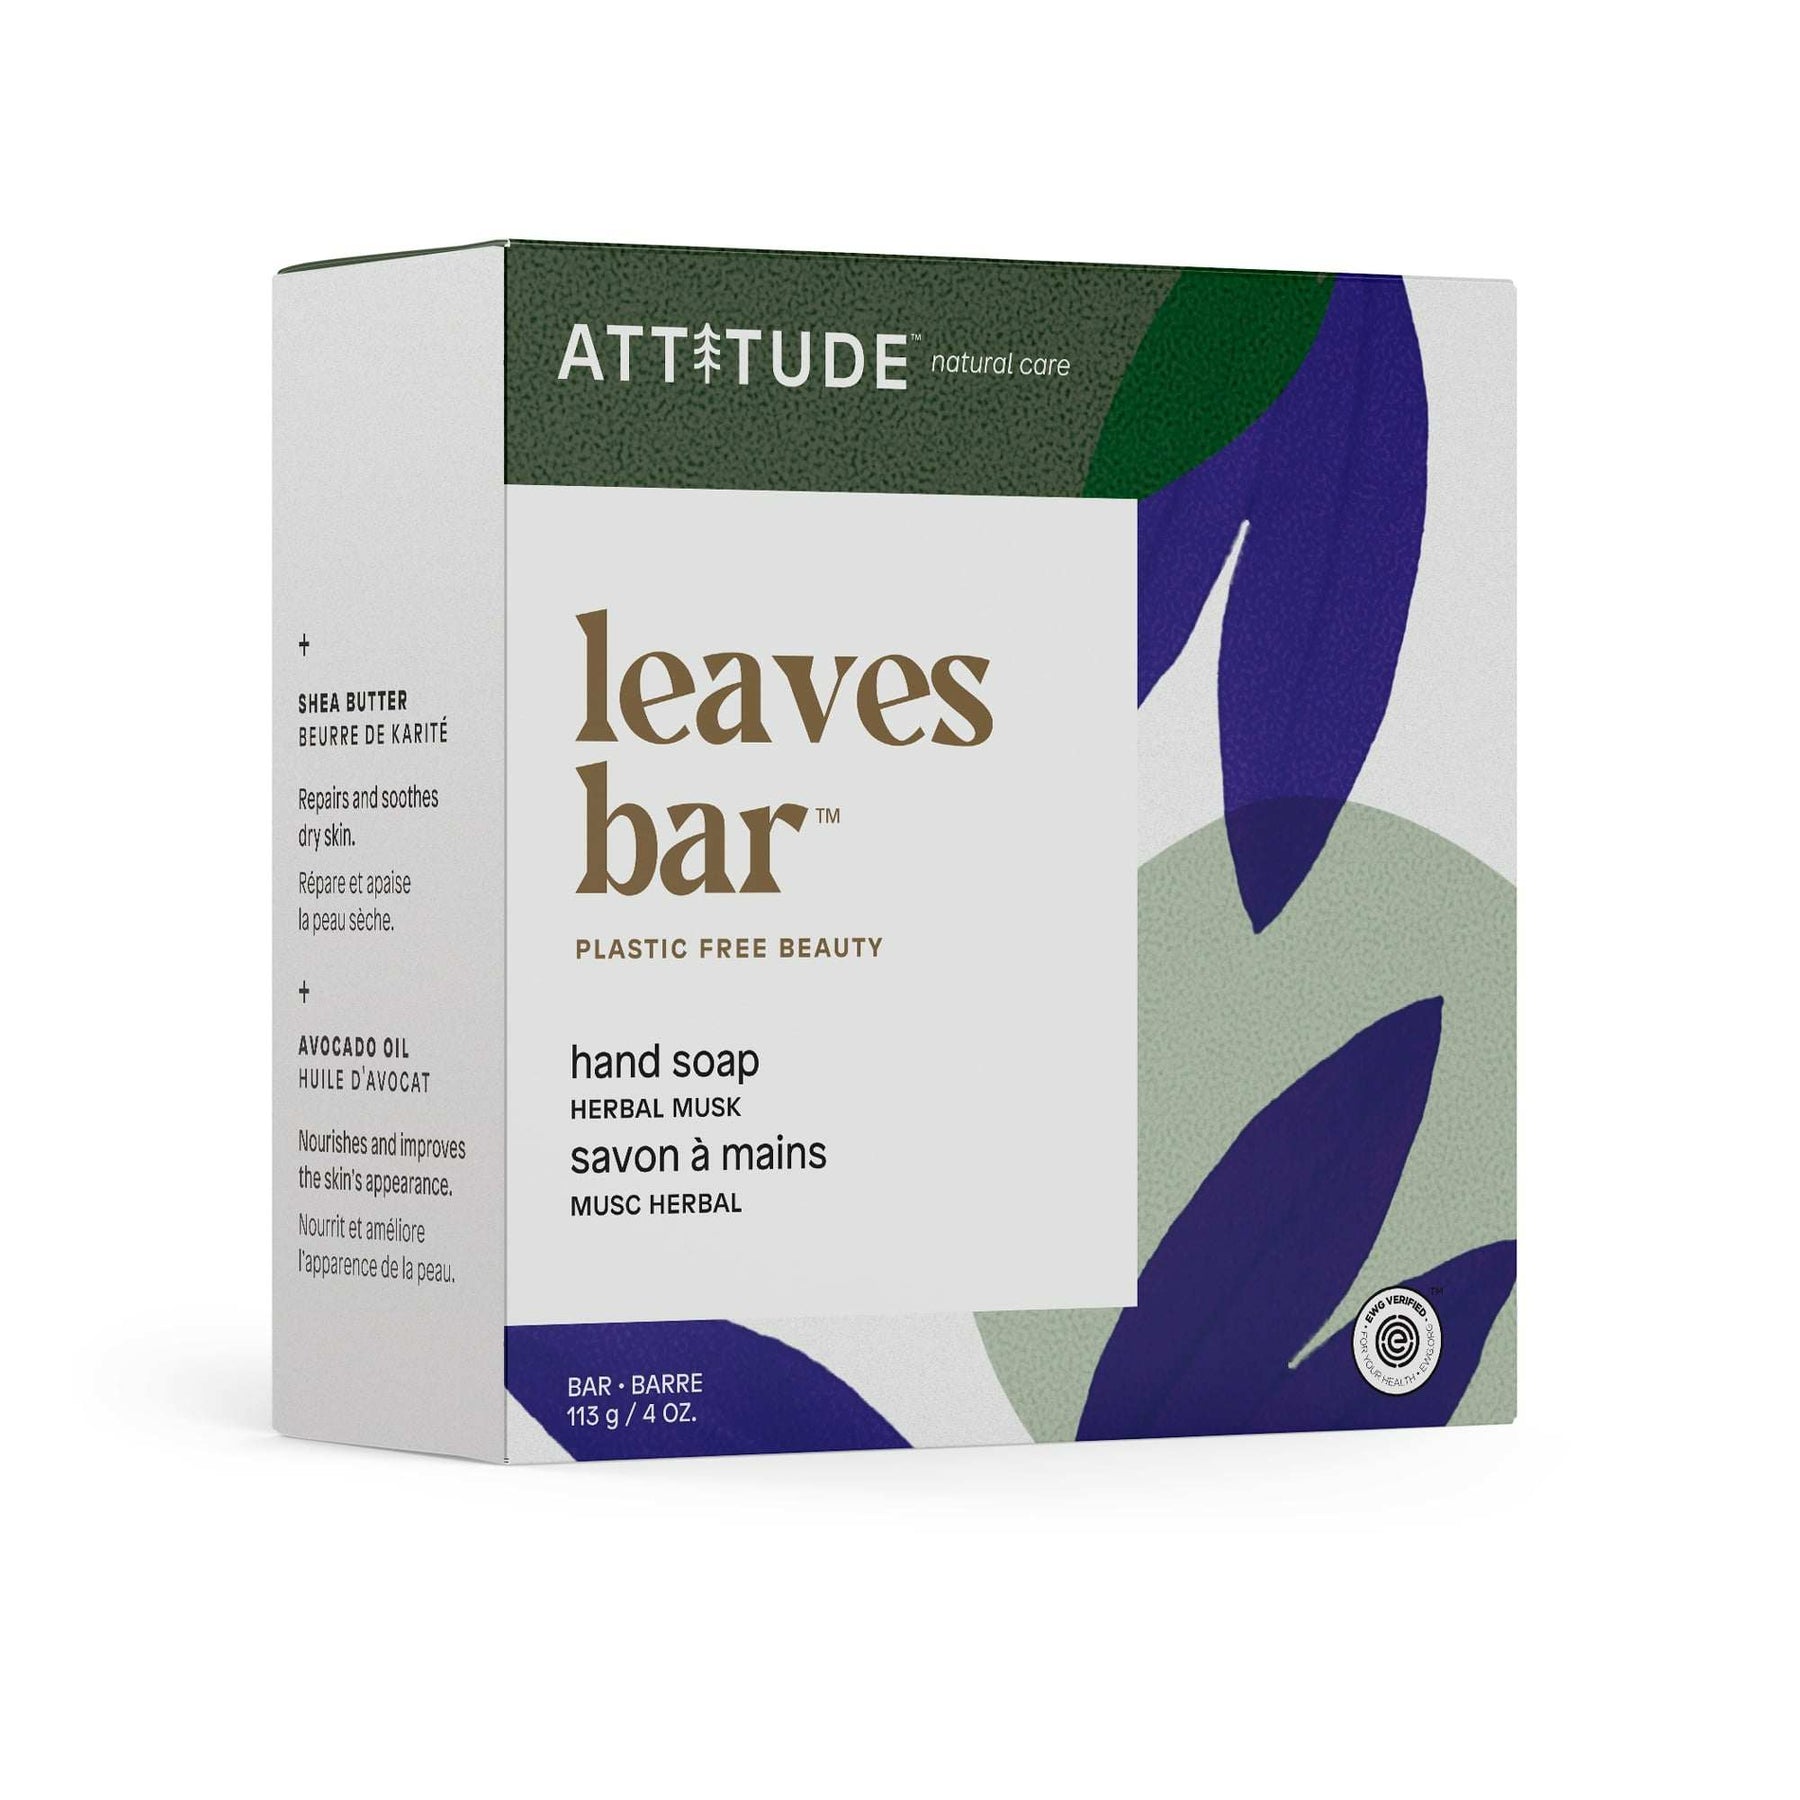 Hand Soap : leaves bar™ - Herbal Musk - by Attitude |ProCare Outlet|